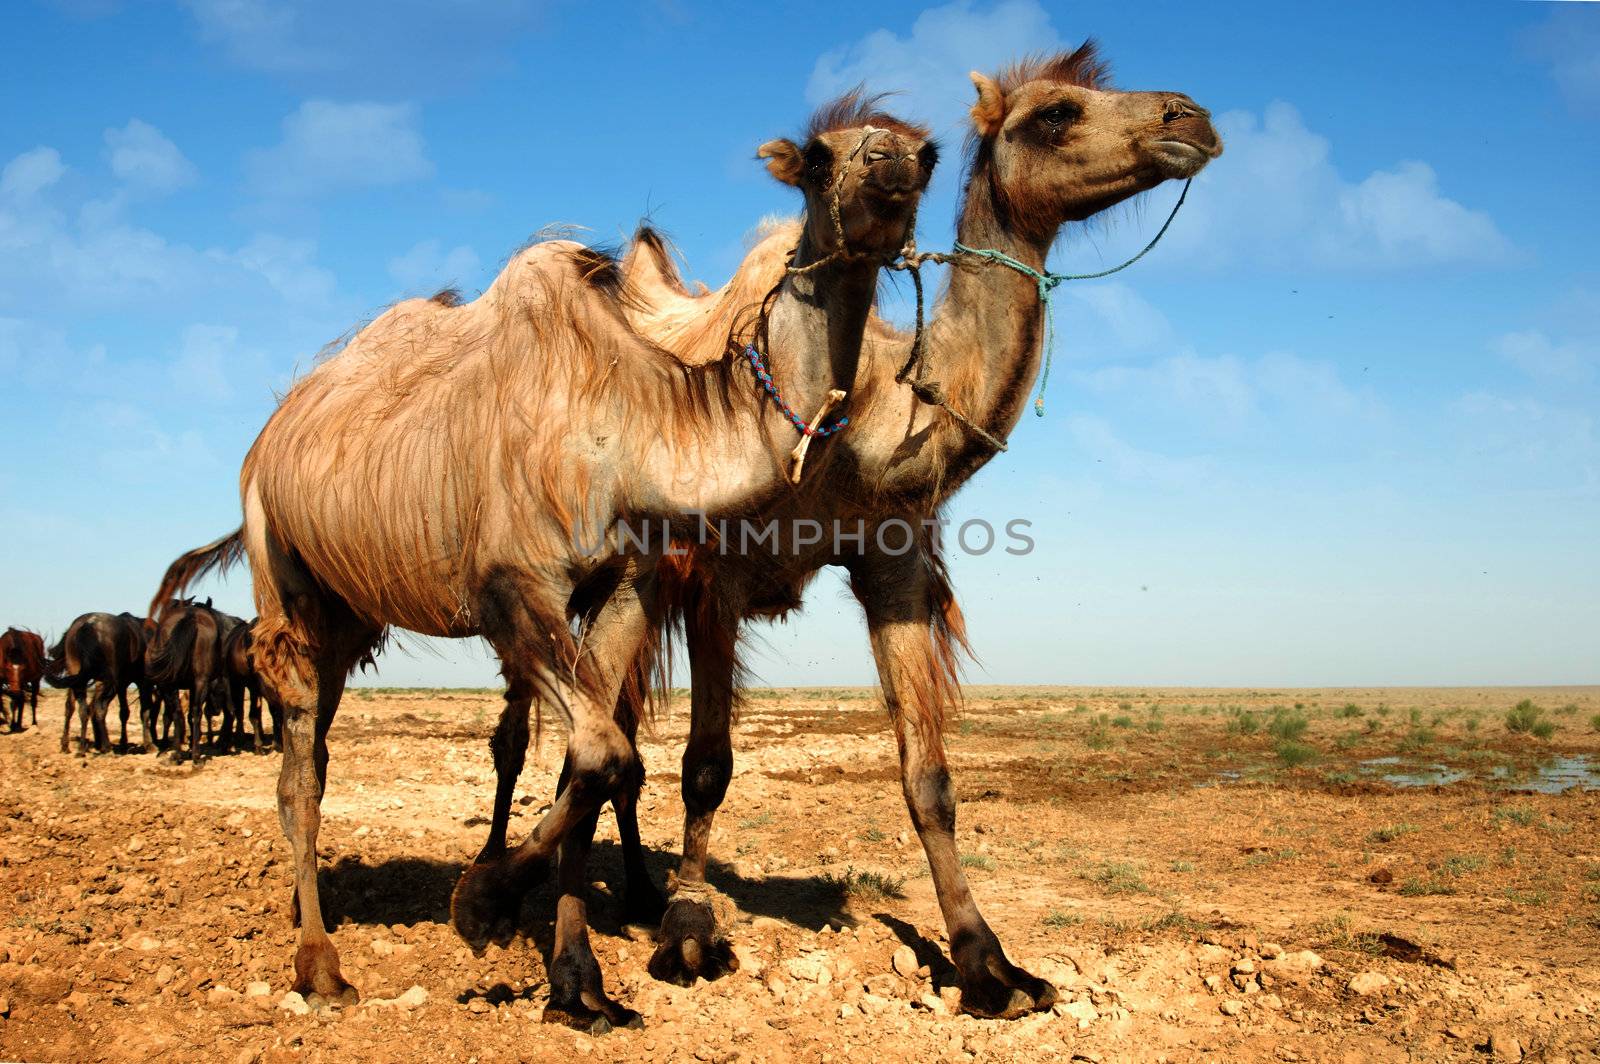 Photo of two camels walking near the horses